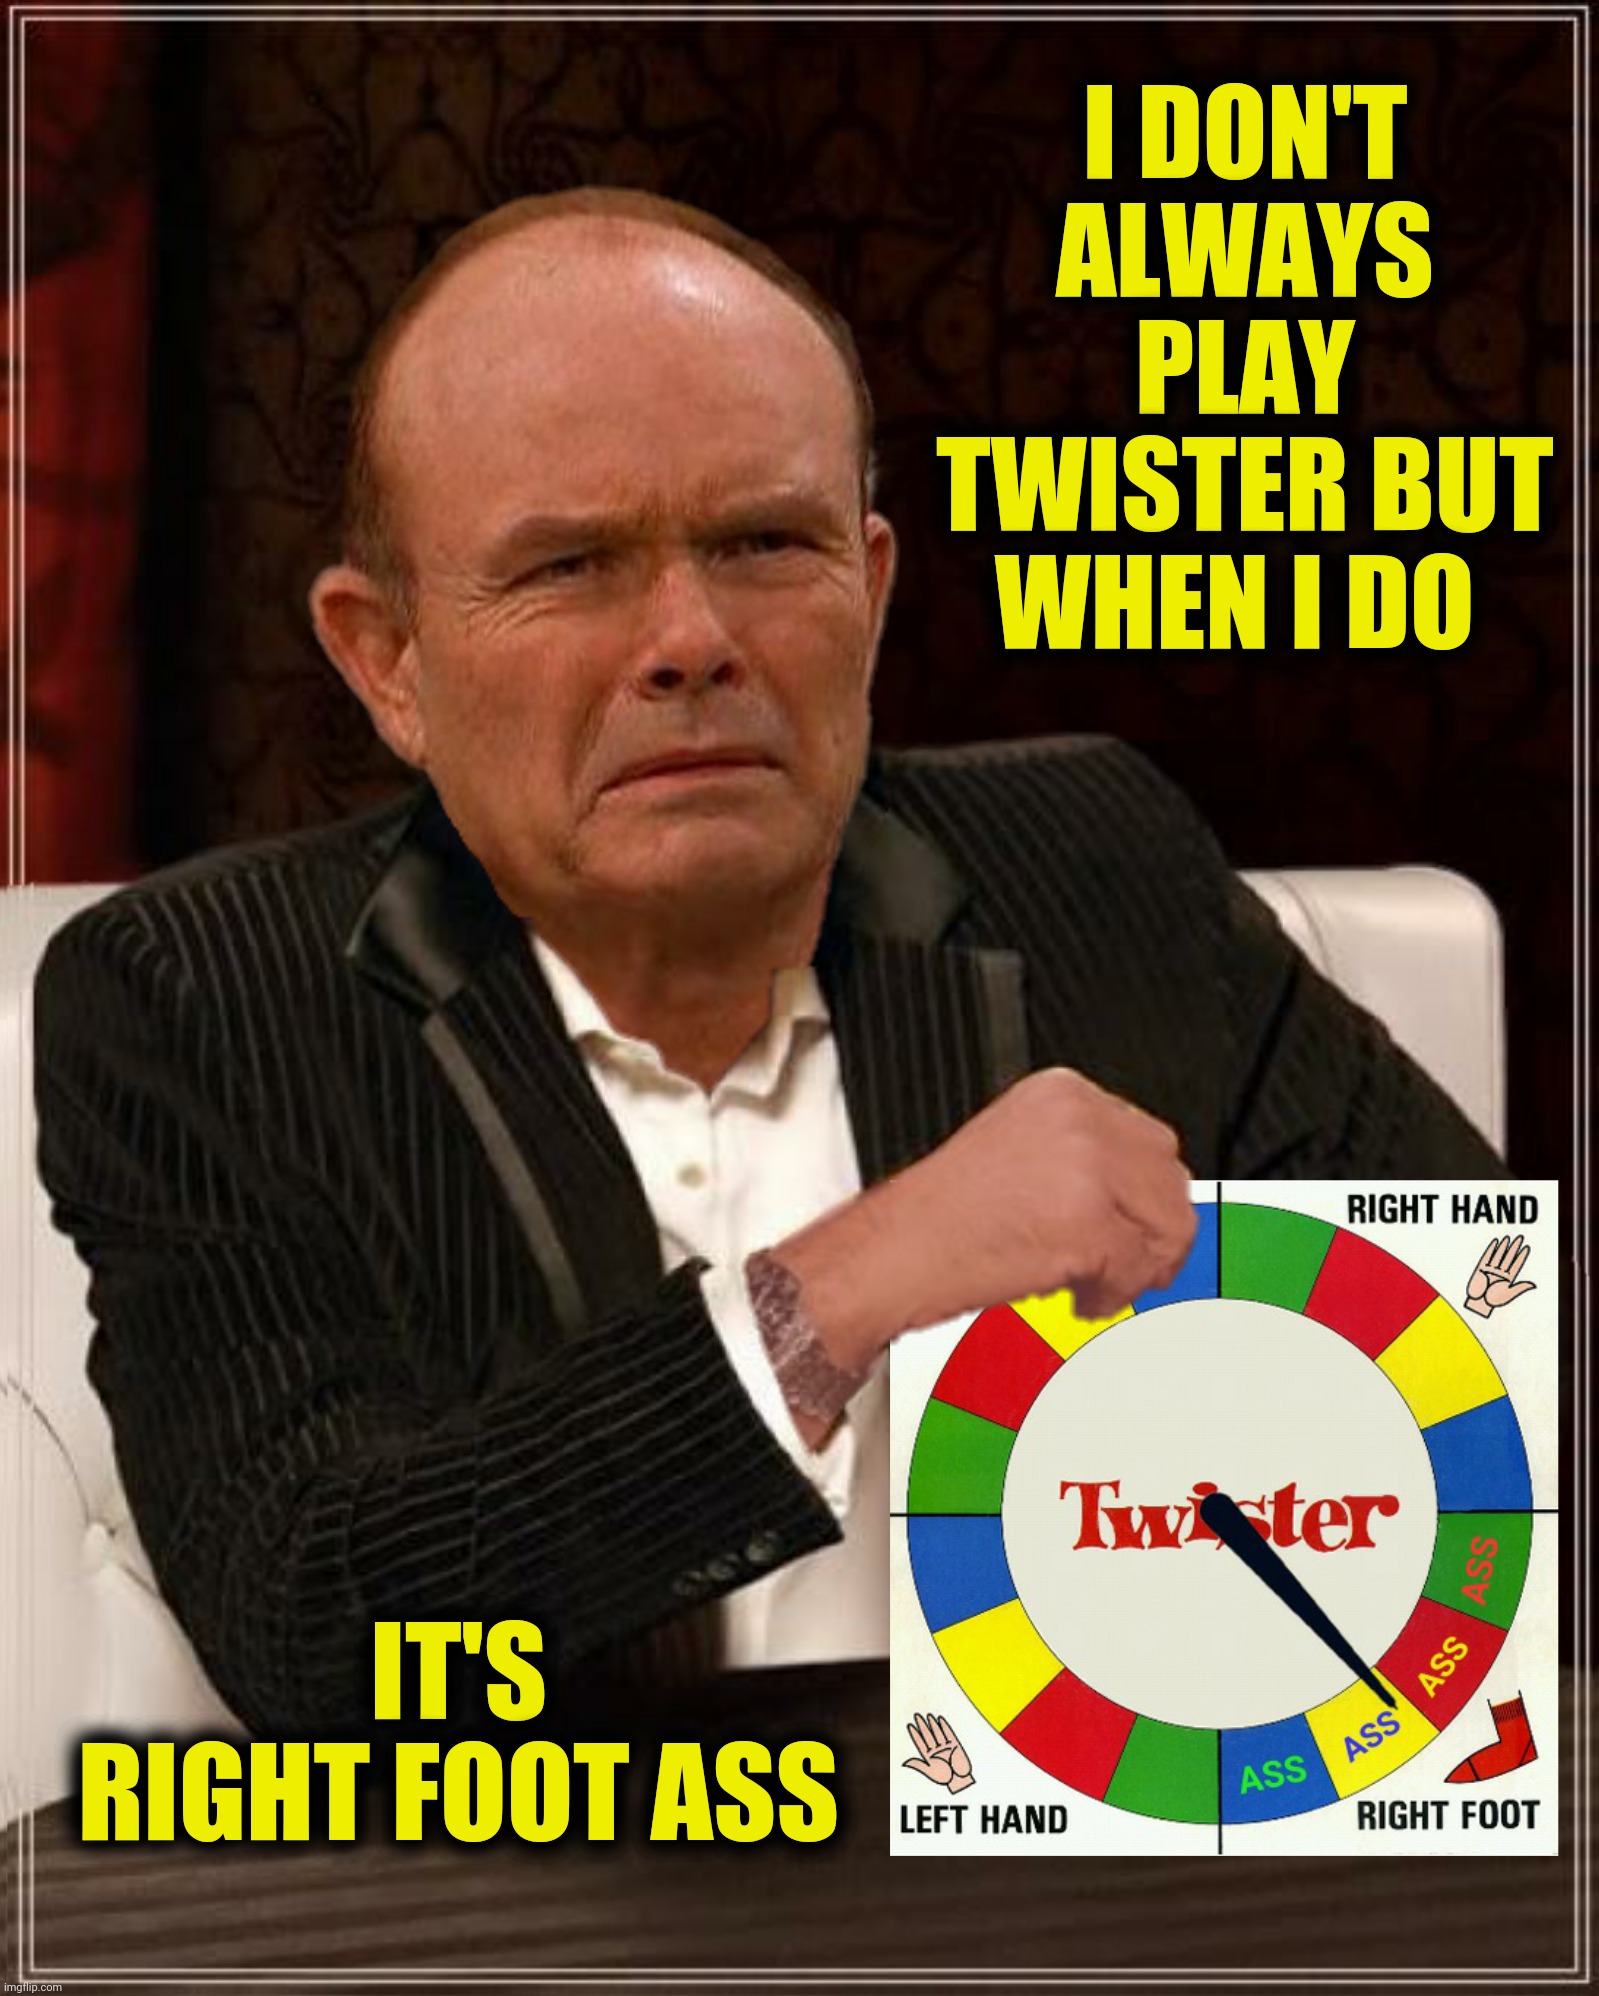 I DON'T ALWAYS PLAY TWISTER BUT WHEN I DO IT'S RIGHT FOOT ASS | made w/ Imgflip meme maker